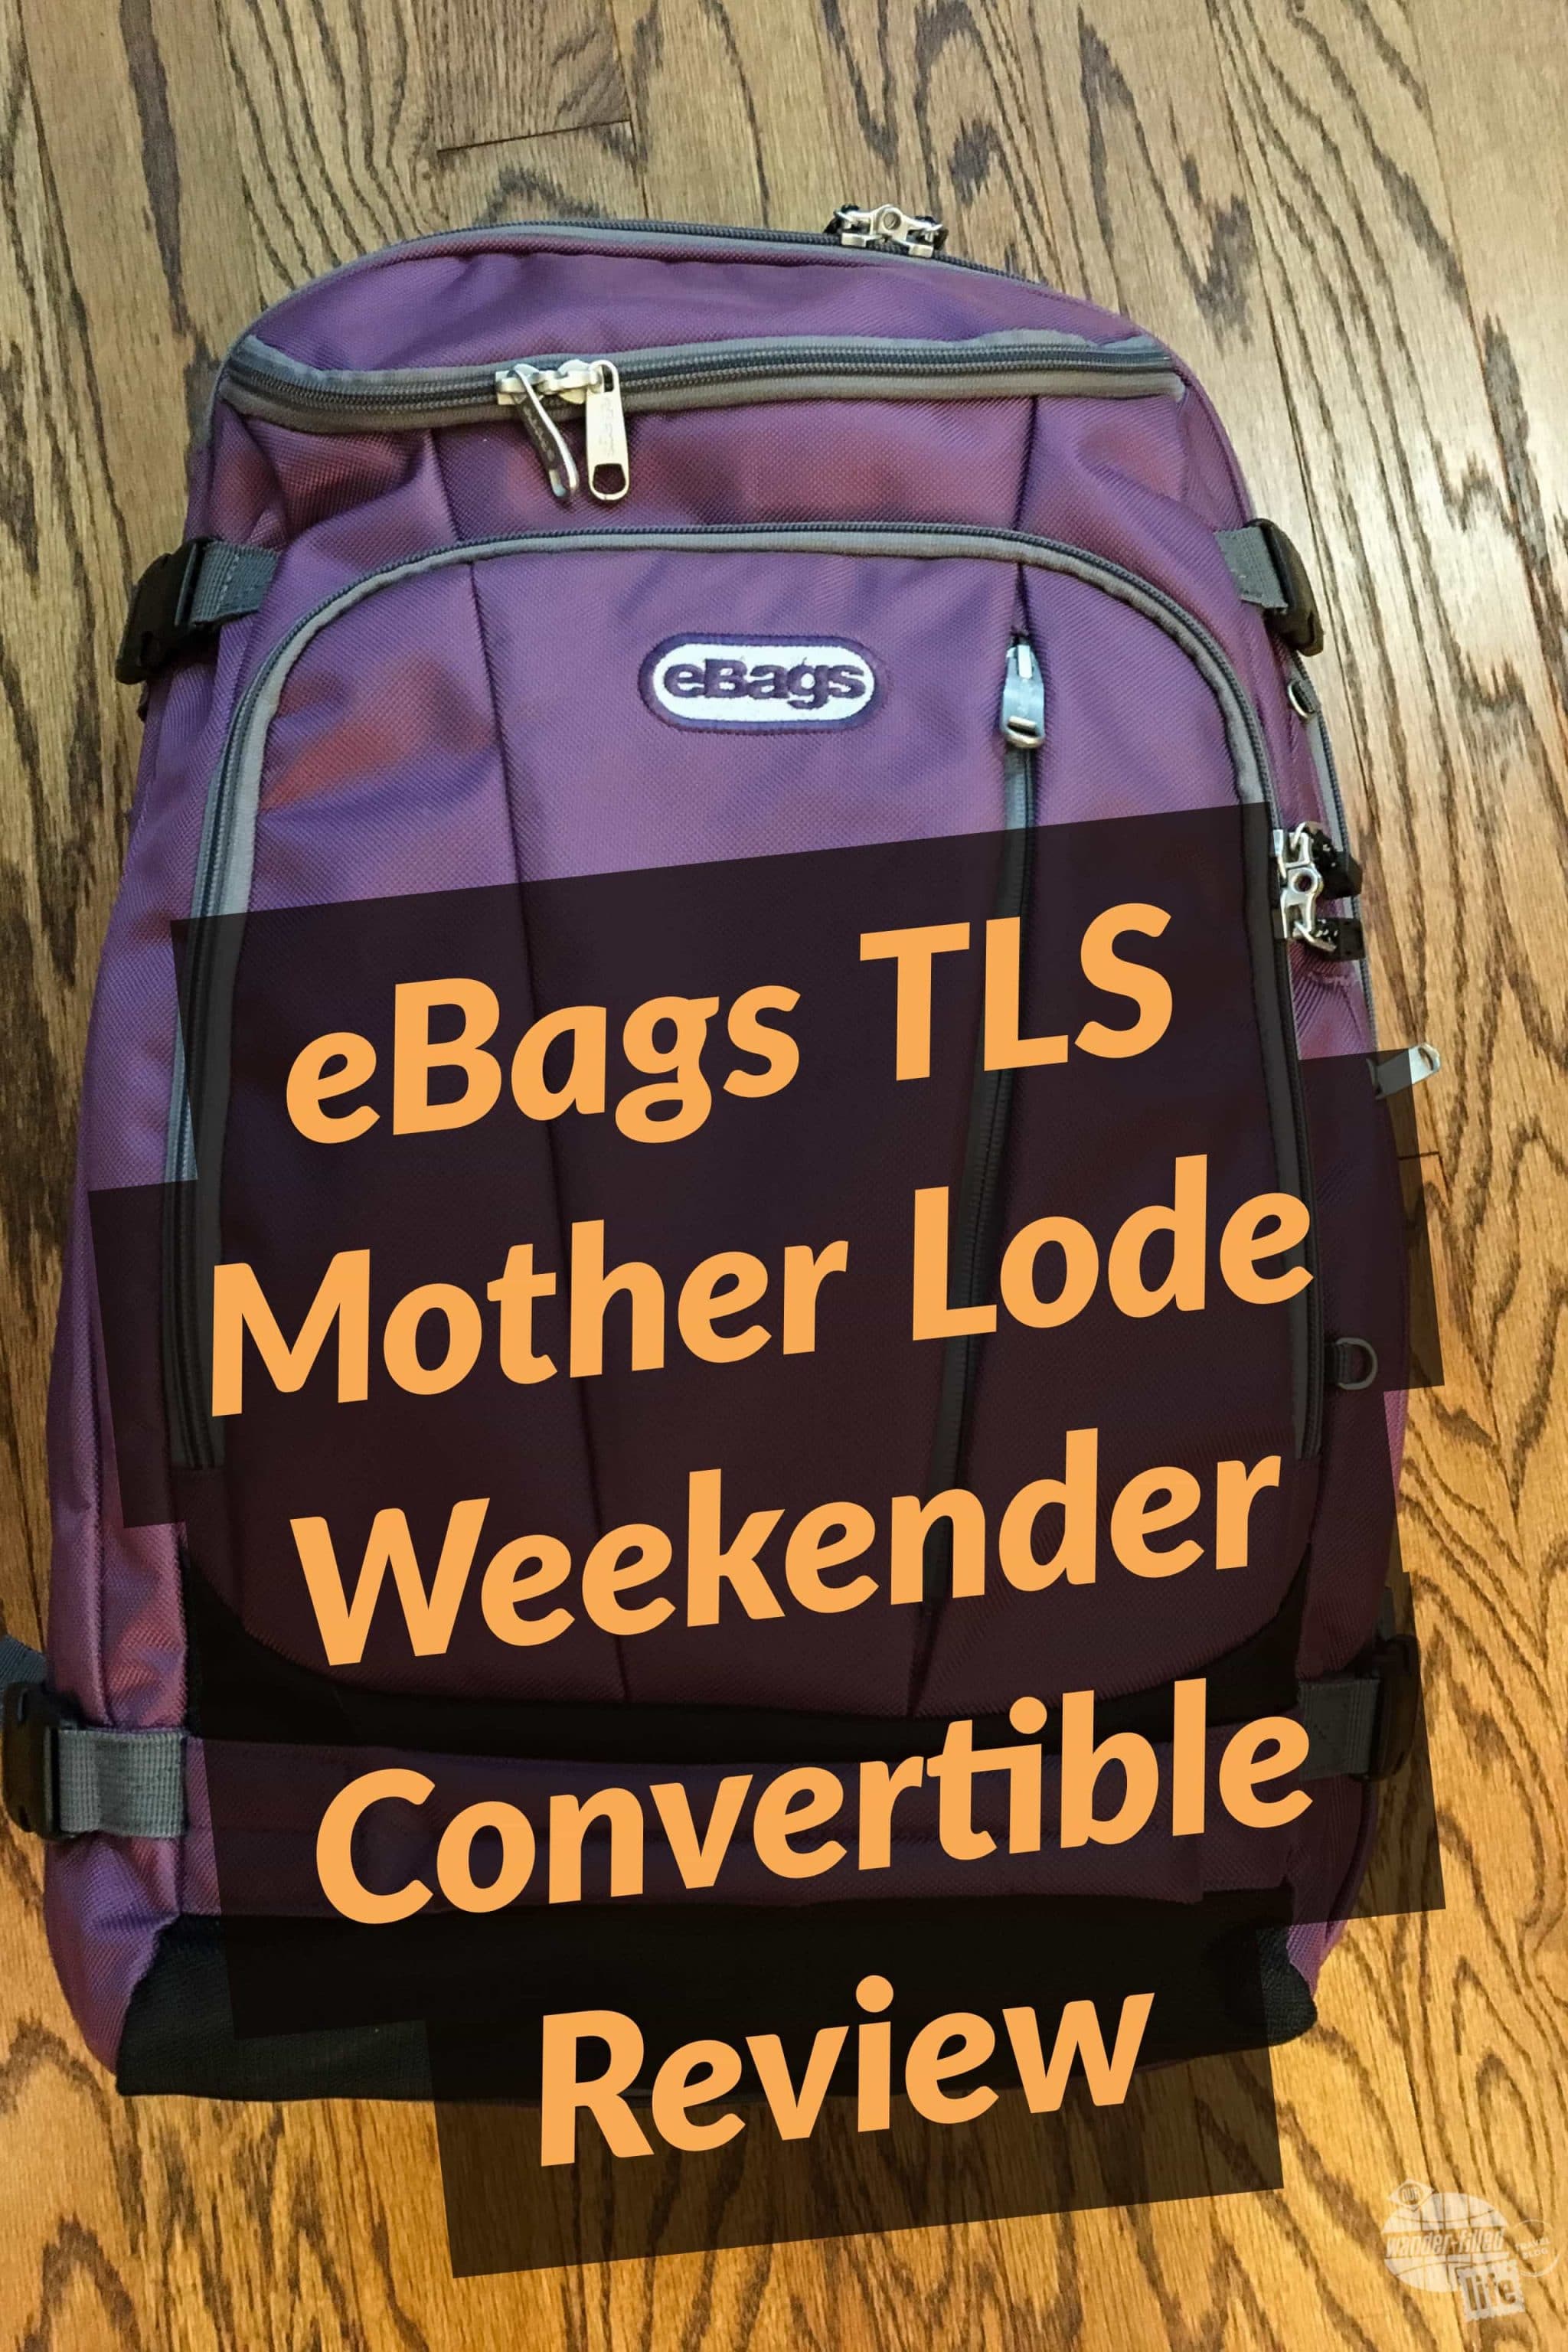 Traveling overseas on a weeklong trip with the eBags TLS Mother Lode Weekender Convertible: a carry-on bag with lots of organizational details.